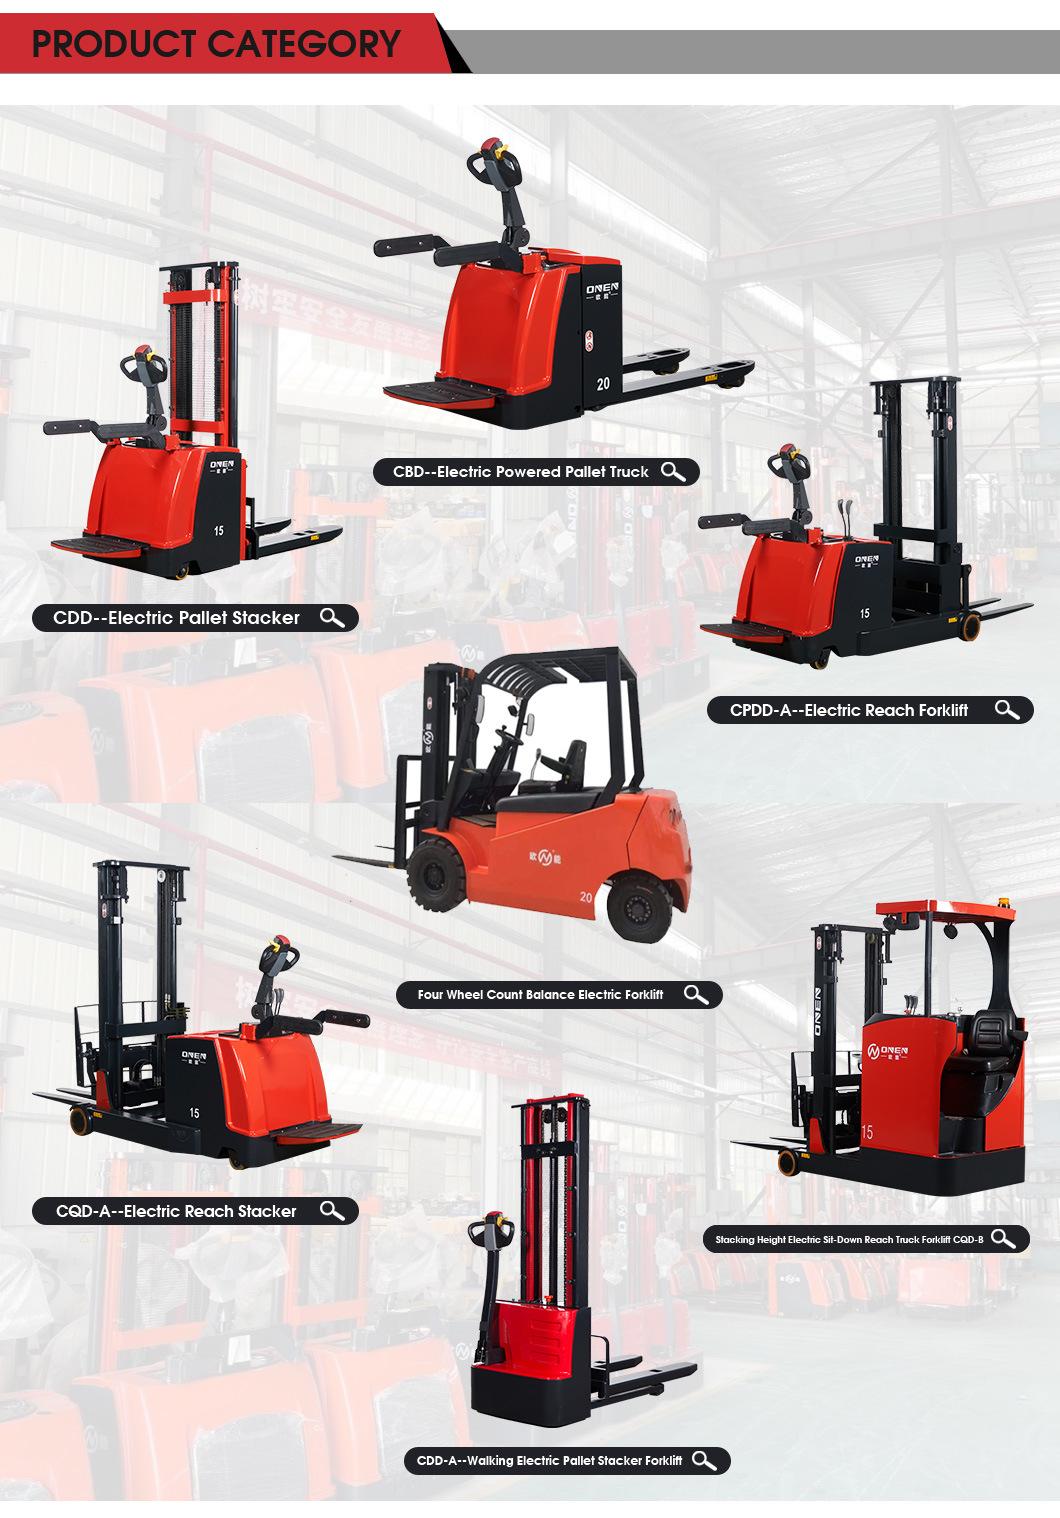 China Factory Price OEM/ODM Customization Is Accept 1000kg-2500kg Electric Pallet Truck Stacker Electric Forklift with CE and ISO14001/9001 Best Price